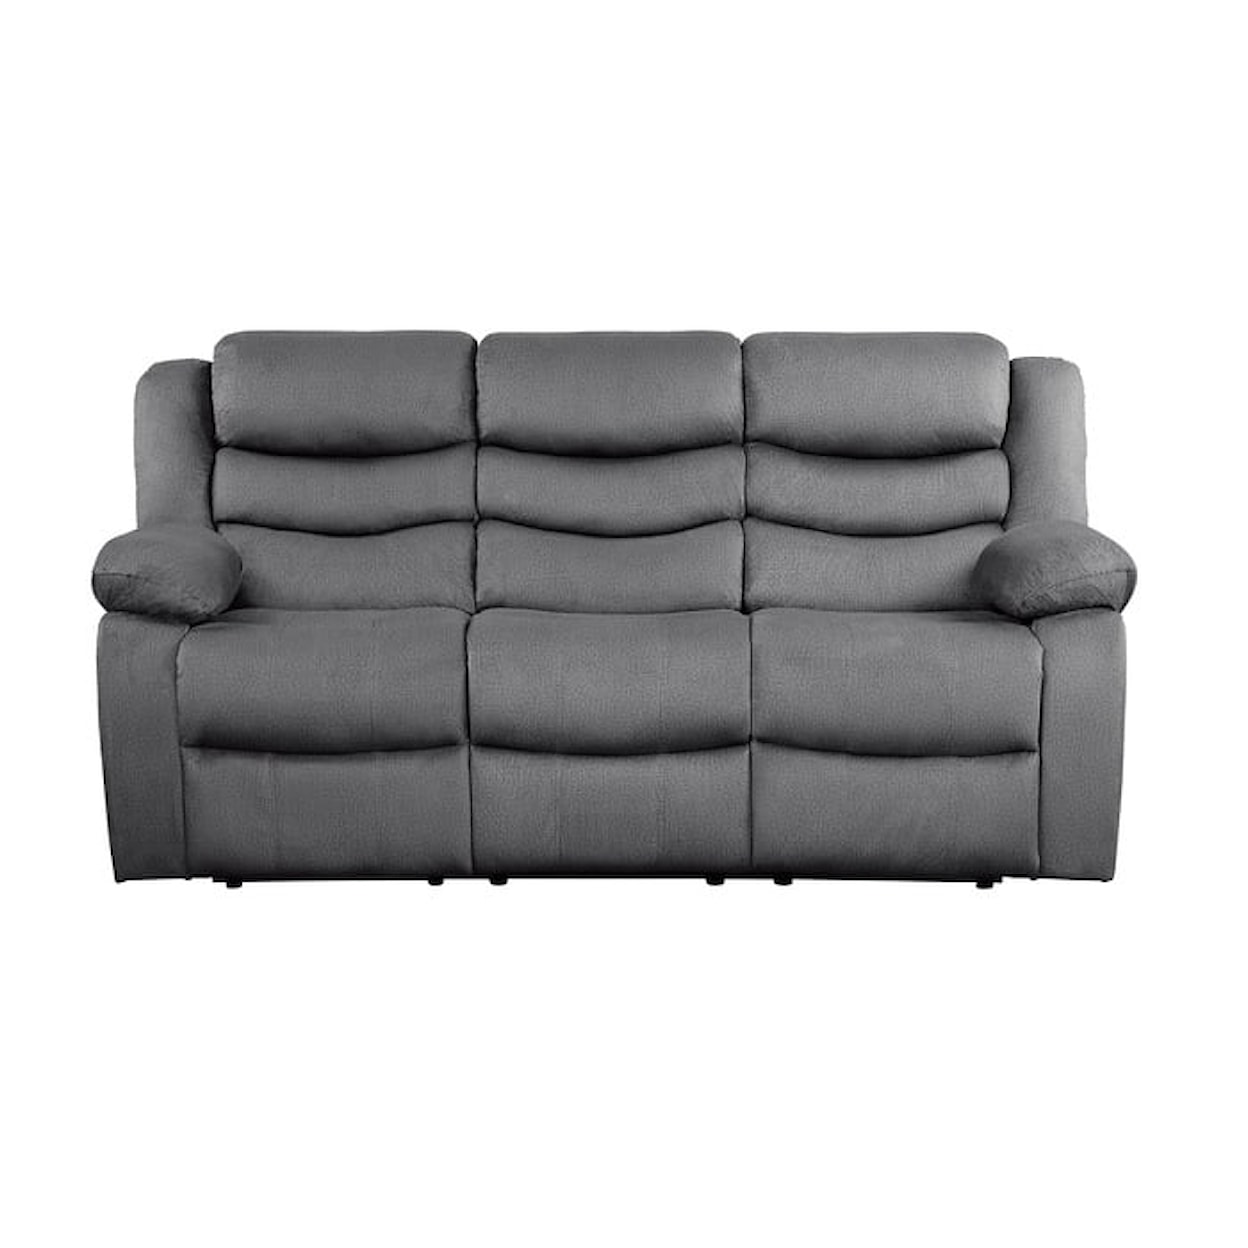 Homelegance Furniture Discus Double Reclining Sofa